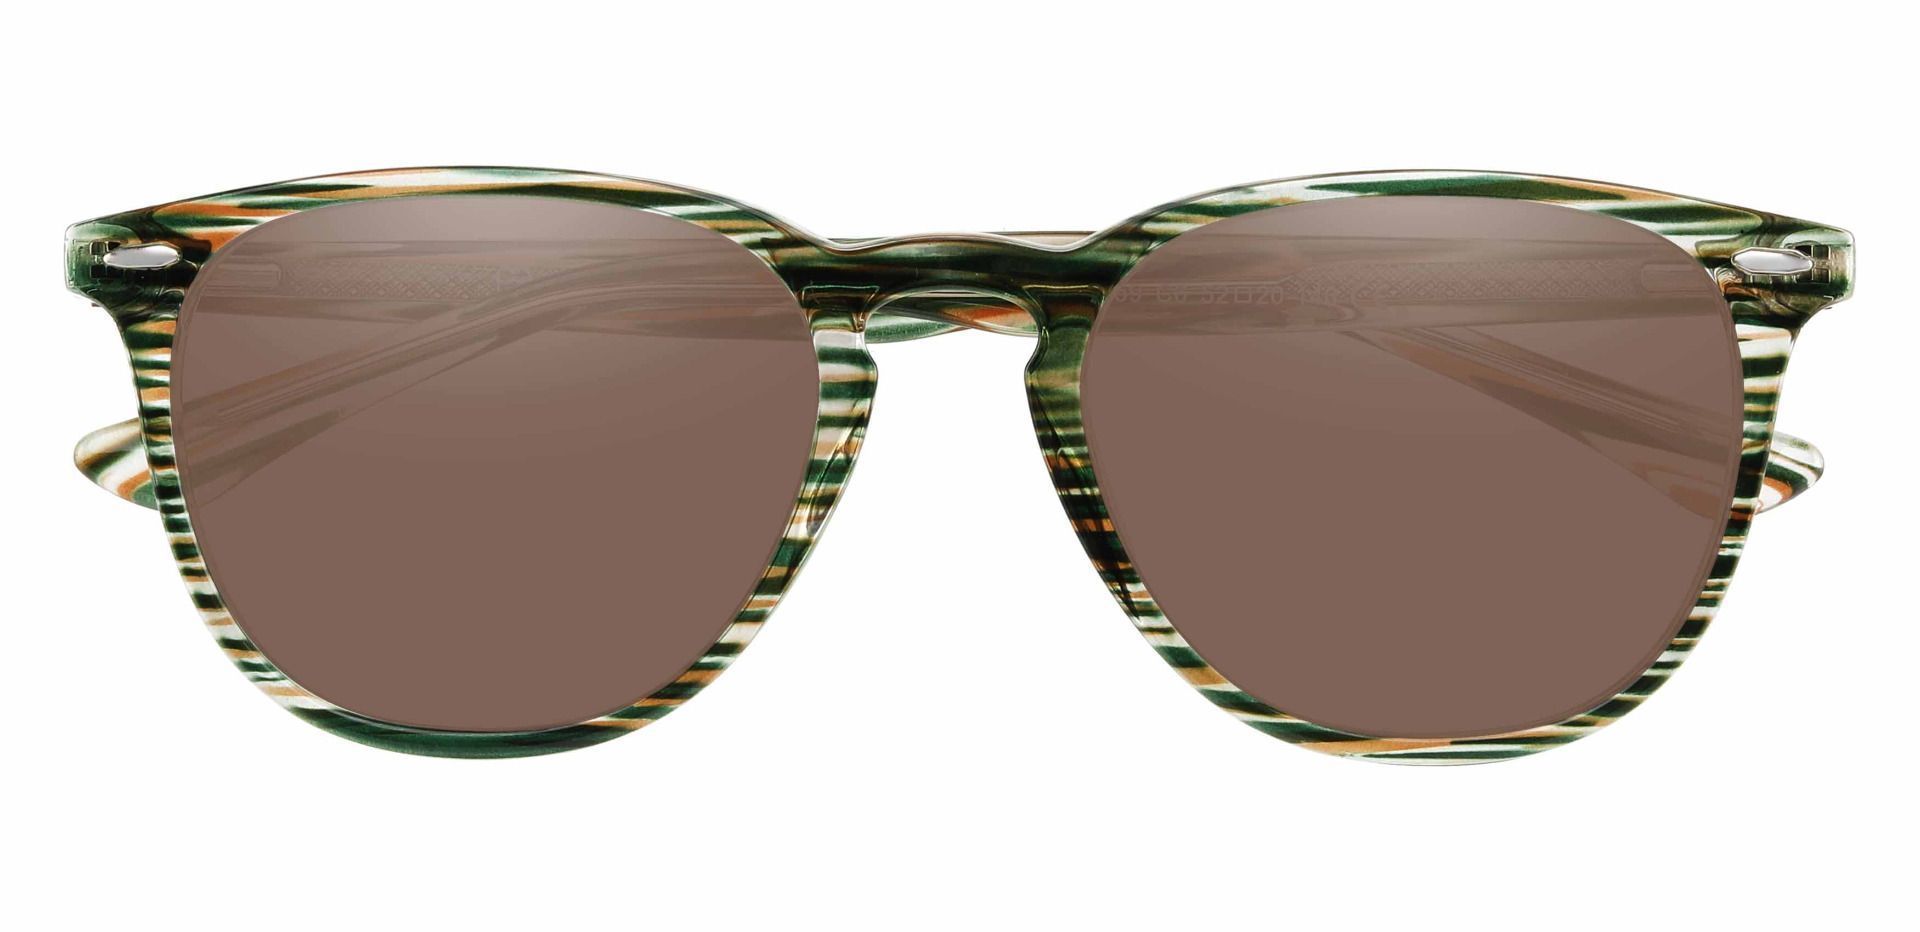 Sycamore Oval Non-Rx Sunglasses - Green Frame With Brown Lenses